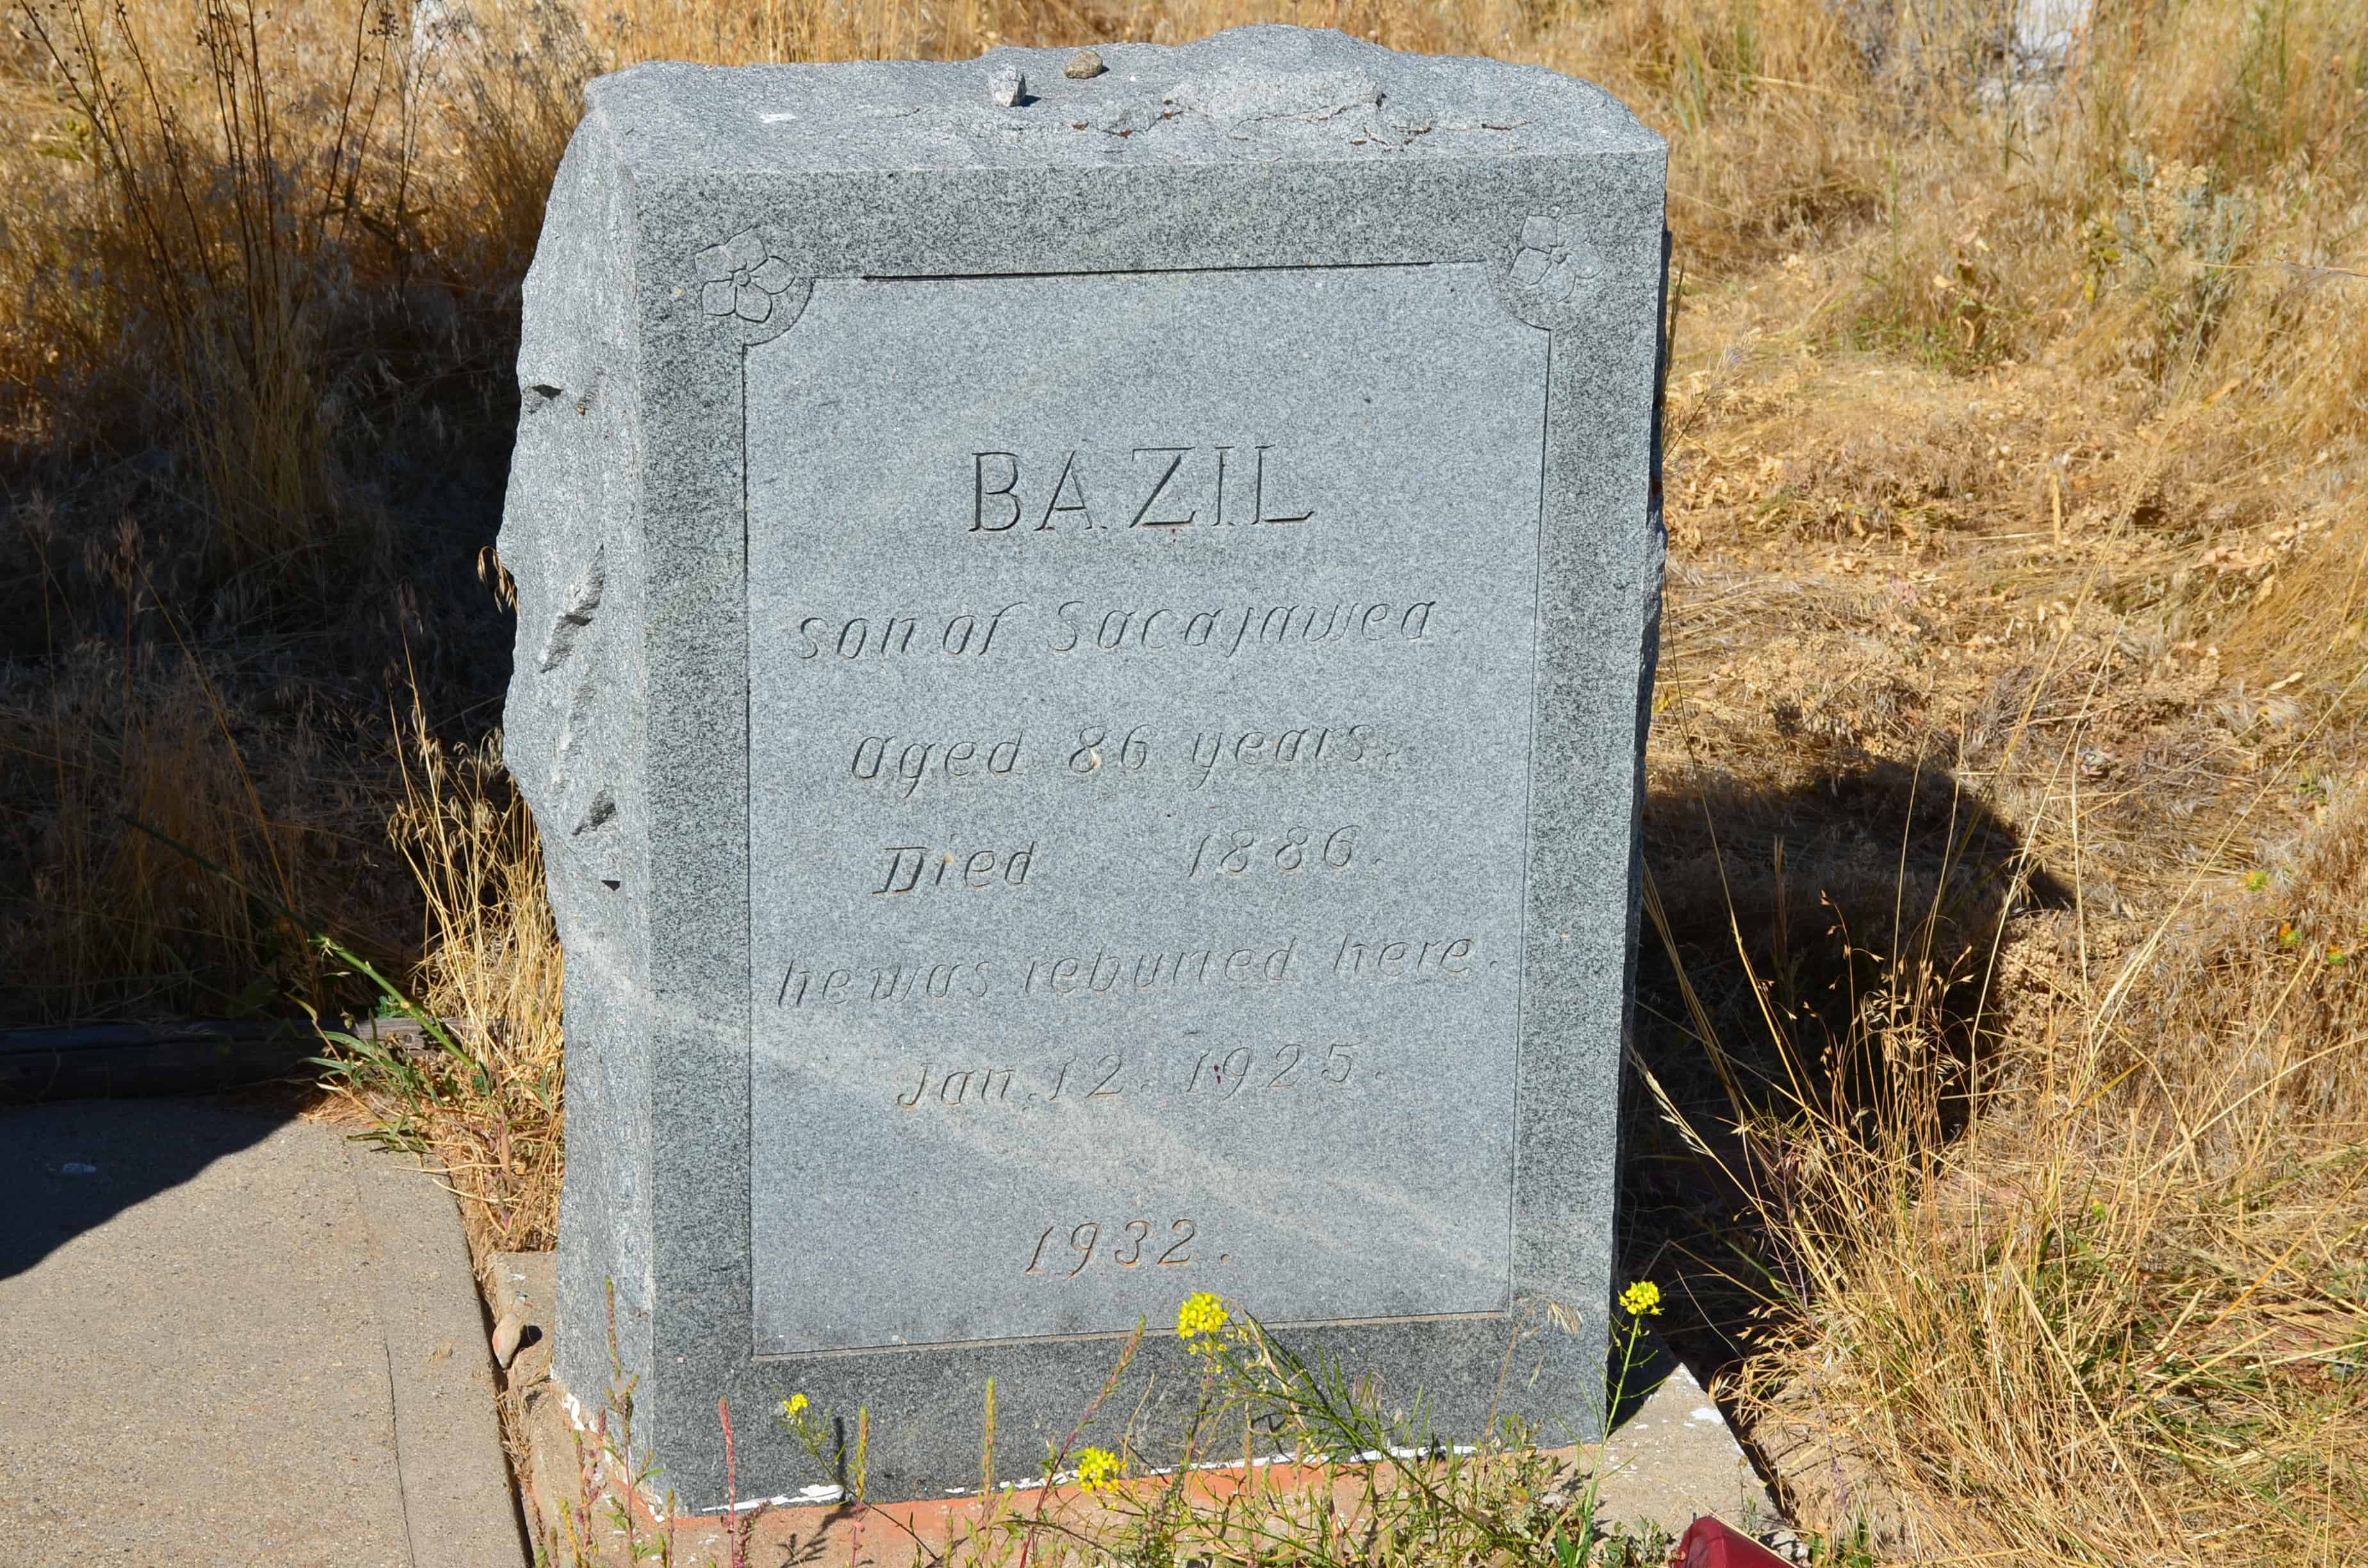 Grave of Bazil at the Sacajawea gravesite in Fort Washakie, Wyoming